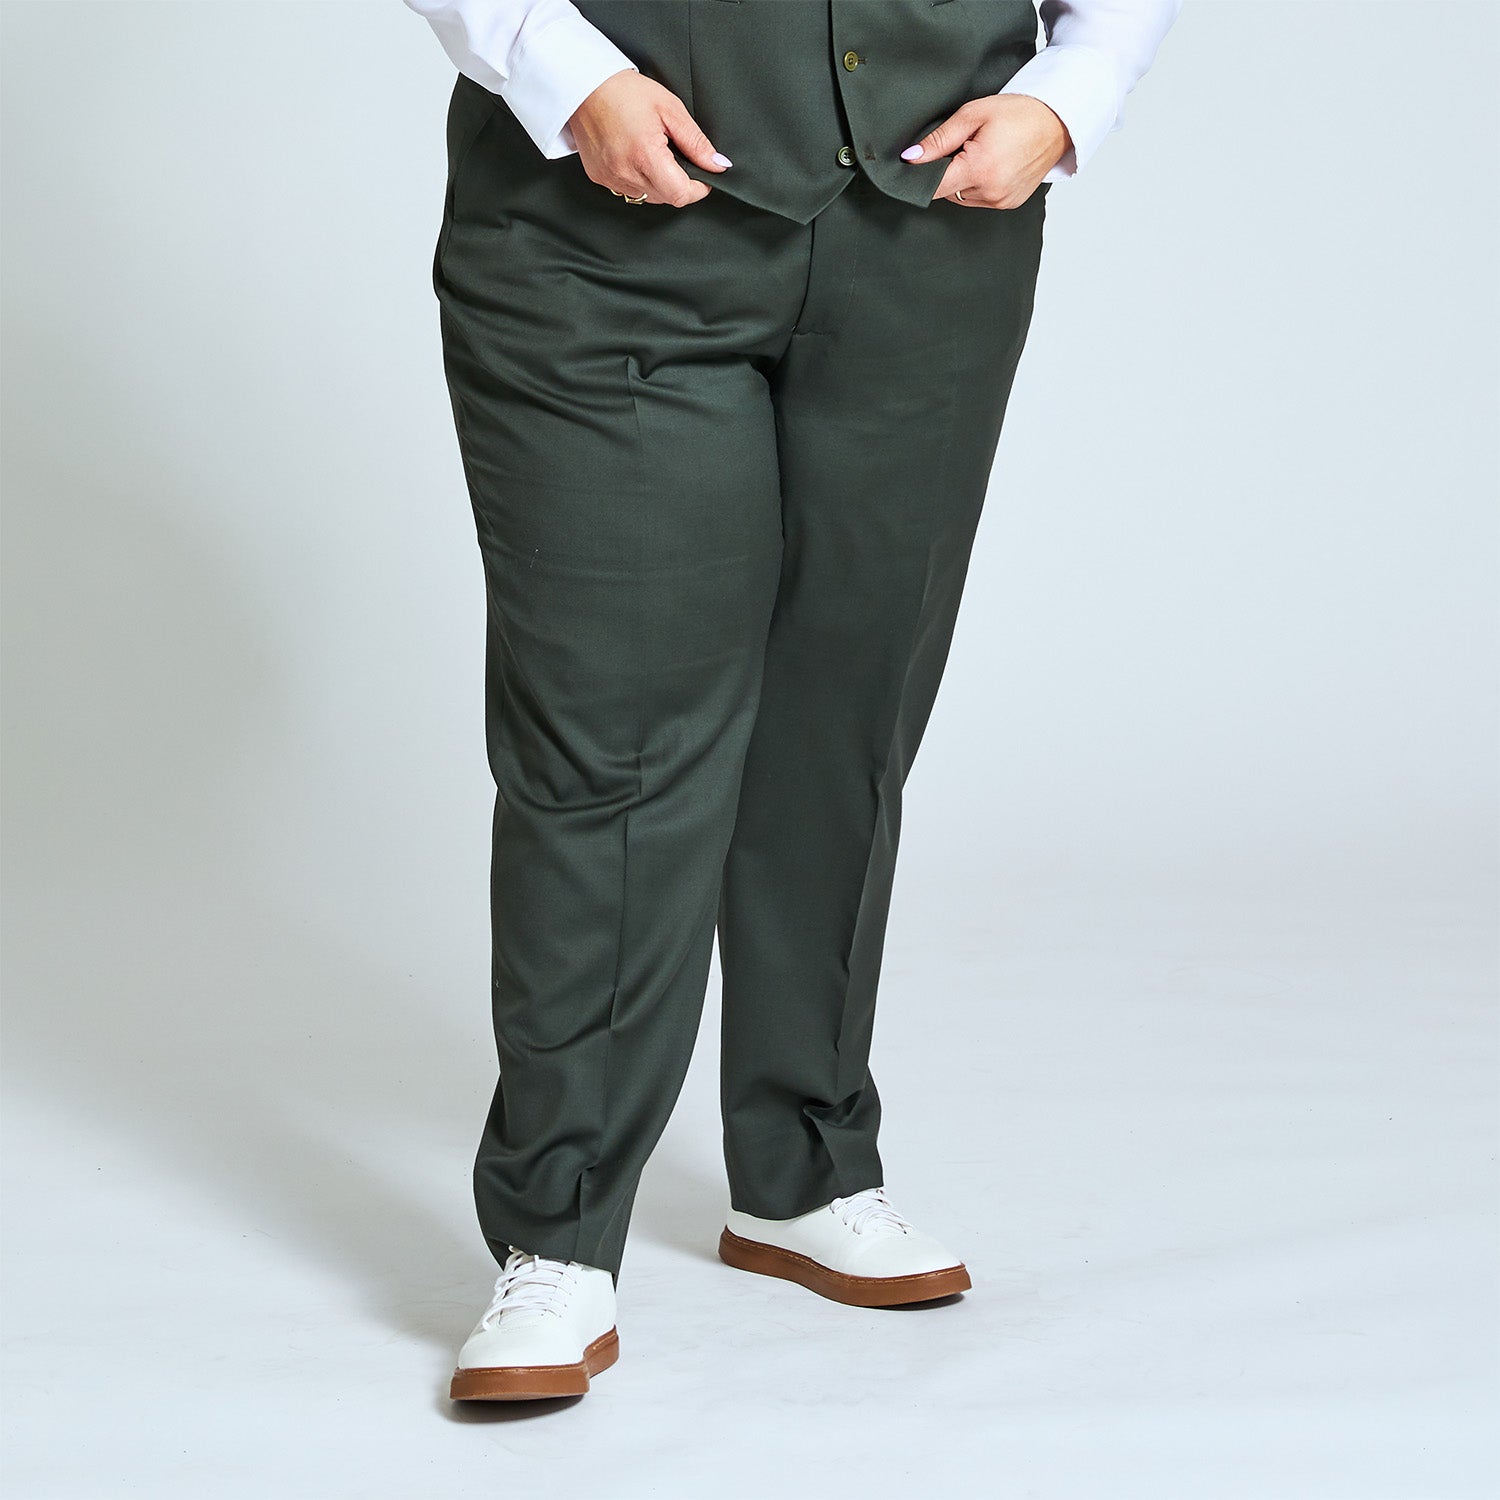 Androgynous model wearing olive dress pants by Kirrin Finch. She is pulling down the matching olive and wearing white sneakers with a gum sole. Neutral studio background.